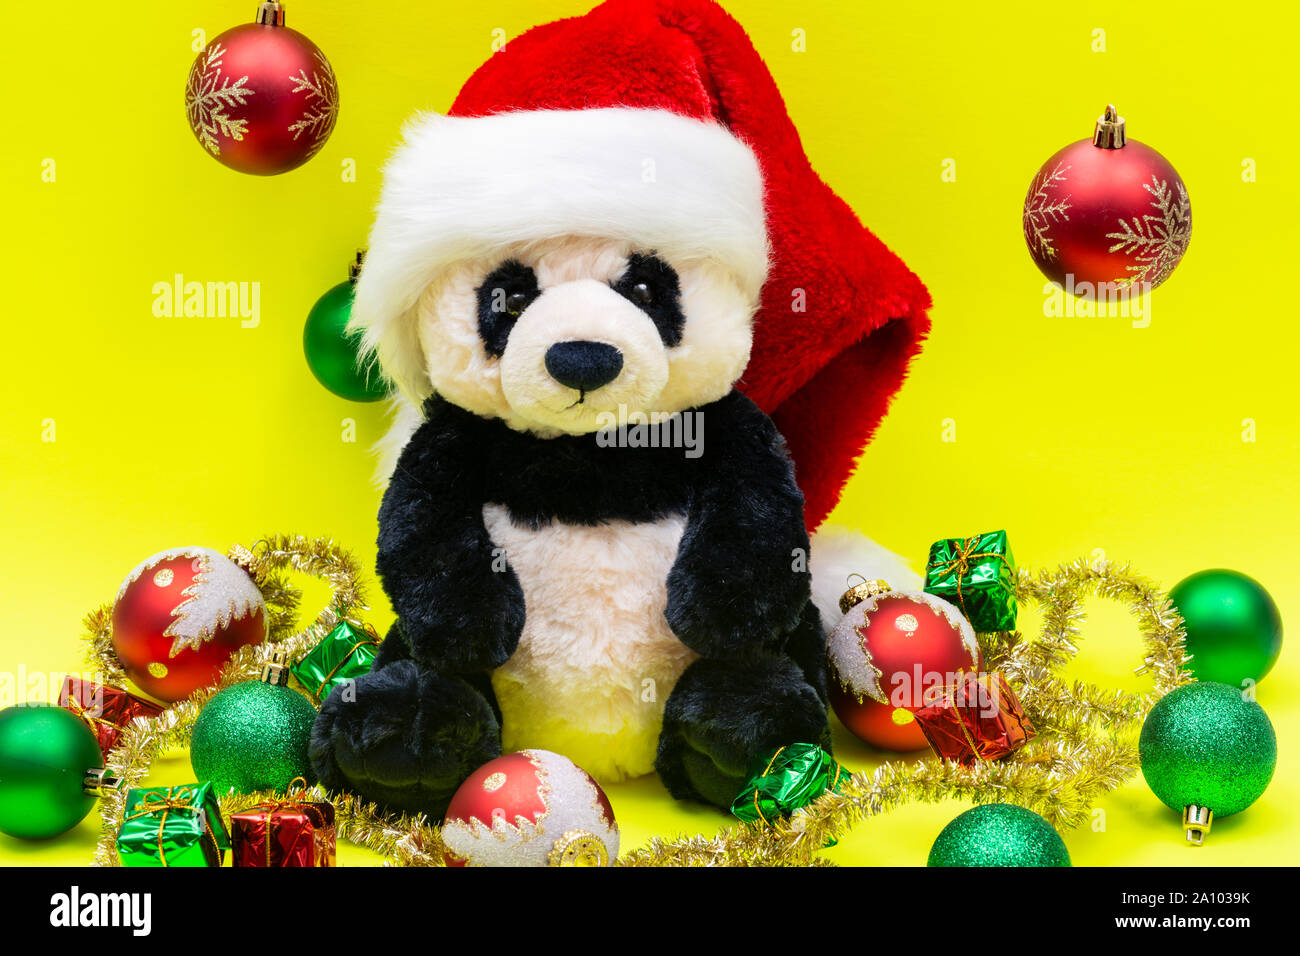 Panda Bear plush toy with Red Christmas Santa Hat surrounded by Tinsel Garland and Vintage Ornaments on bright yellow background. Holidays concept. Stock Photo